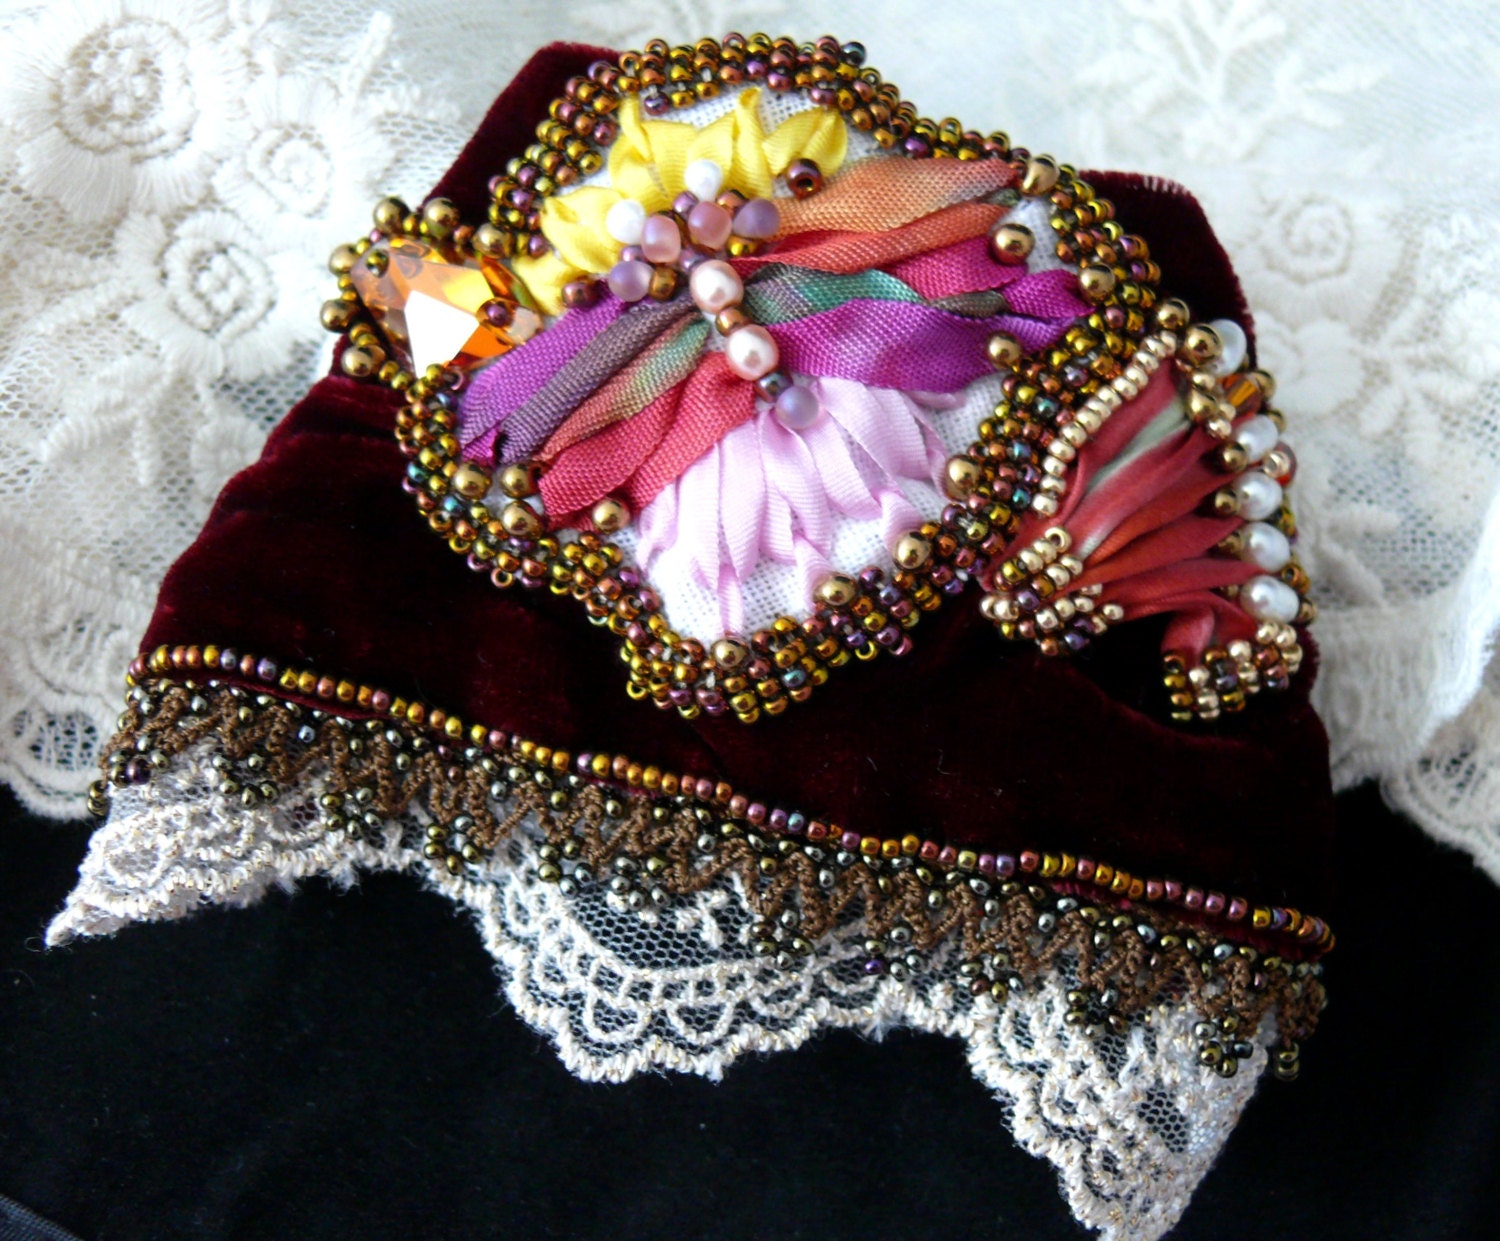 Bead embroidered velvet and lace wrist cuff by MaewaDesign